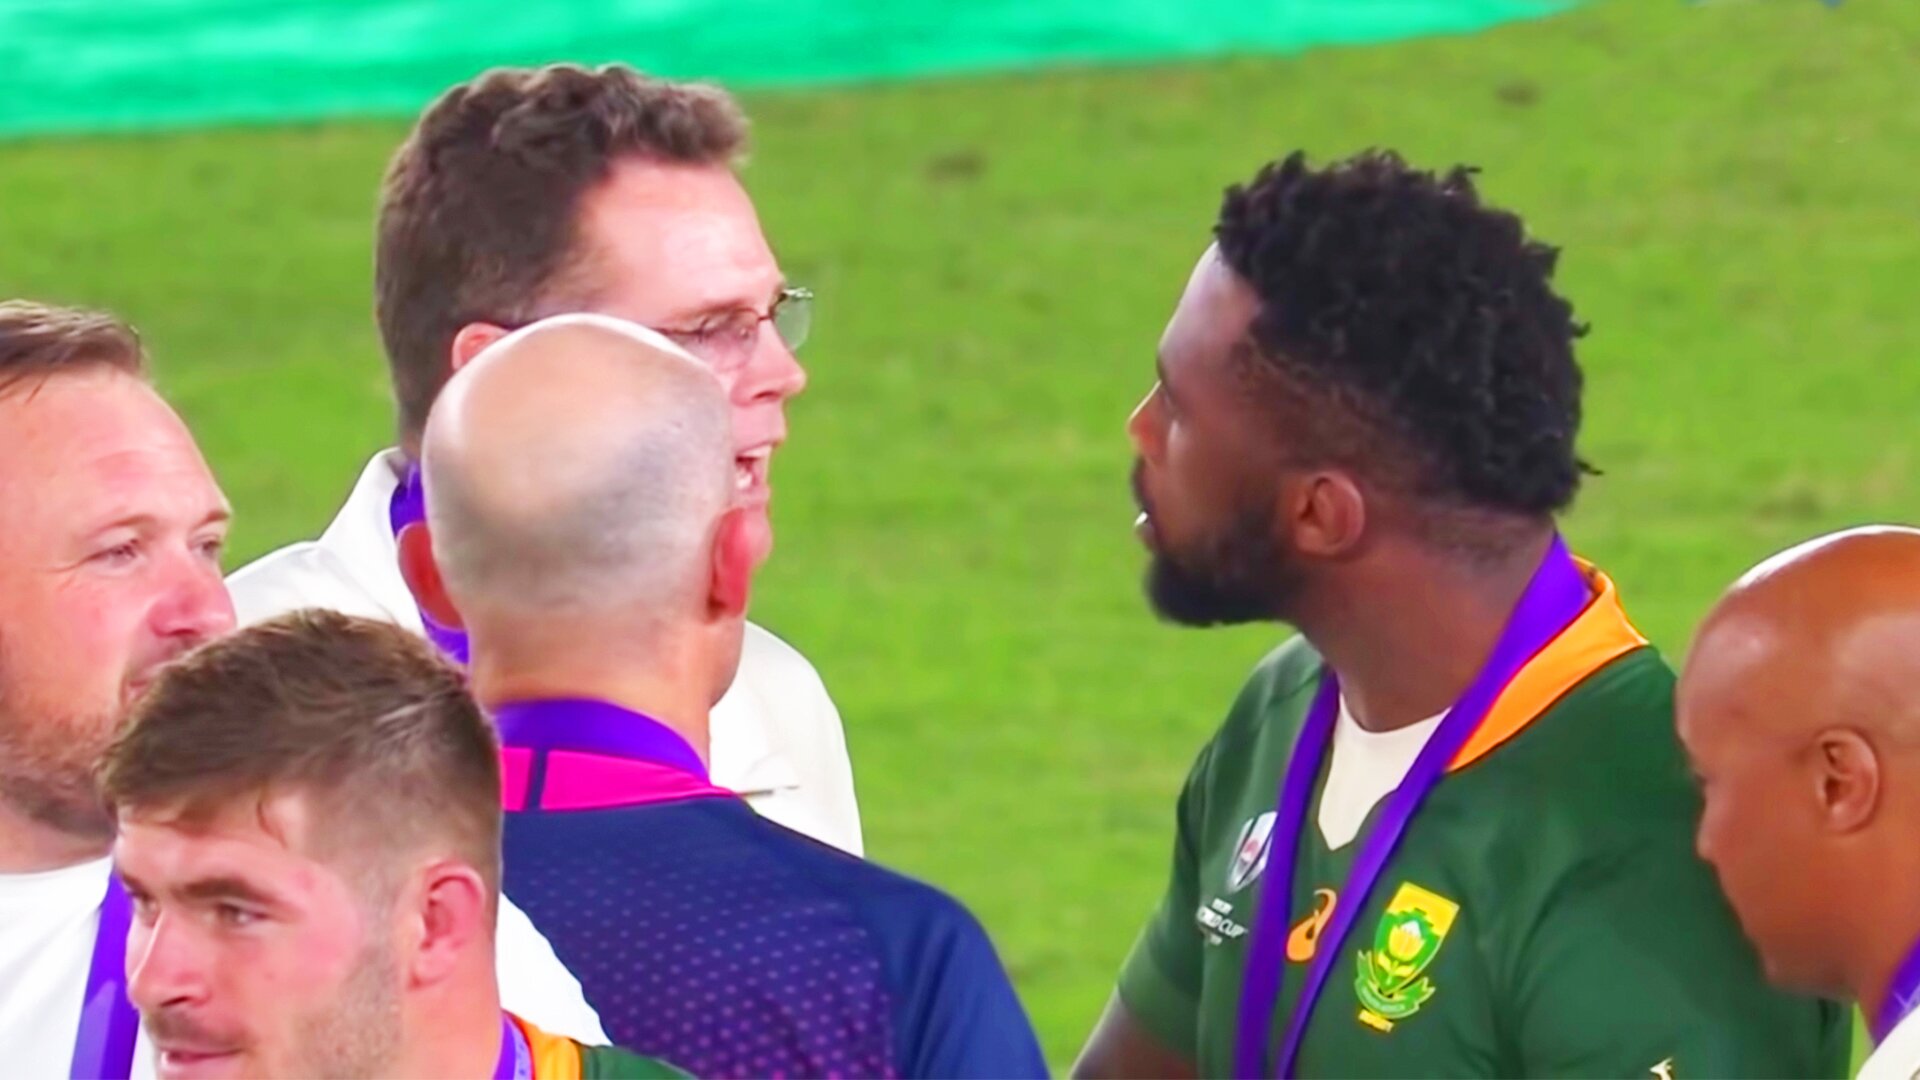 No one noticed this altercation between Rassie Erasmus and Siya Kolisi after the World Cup final medal ceremony